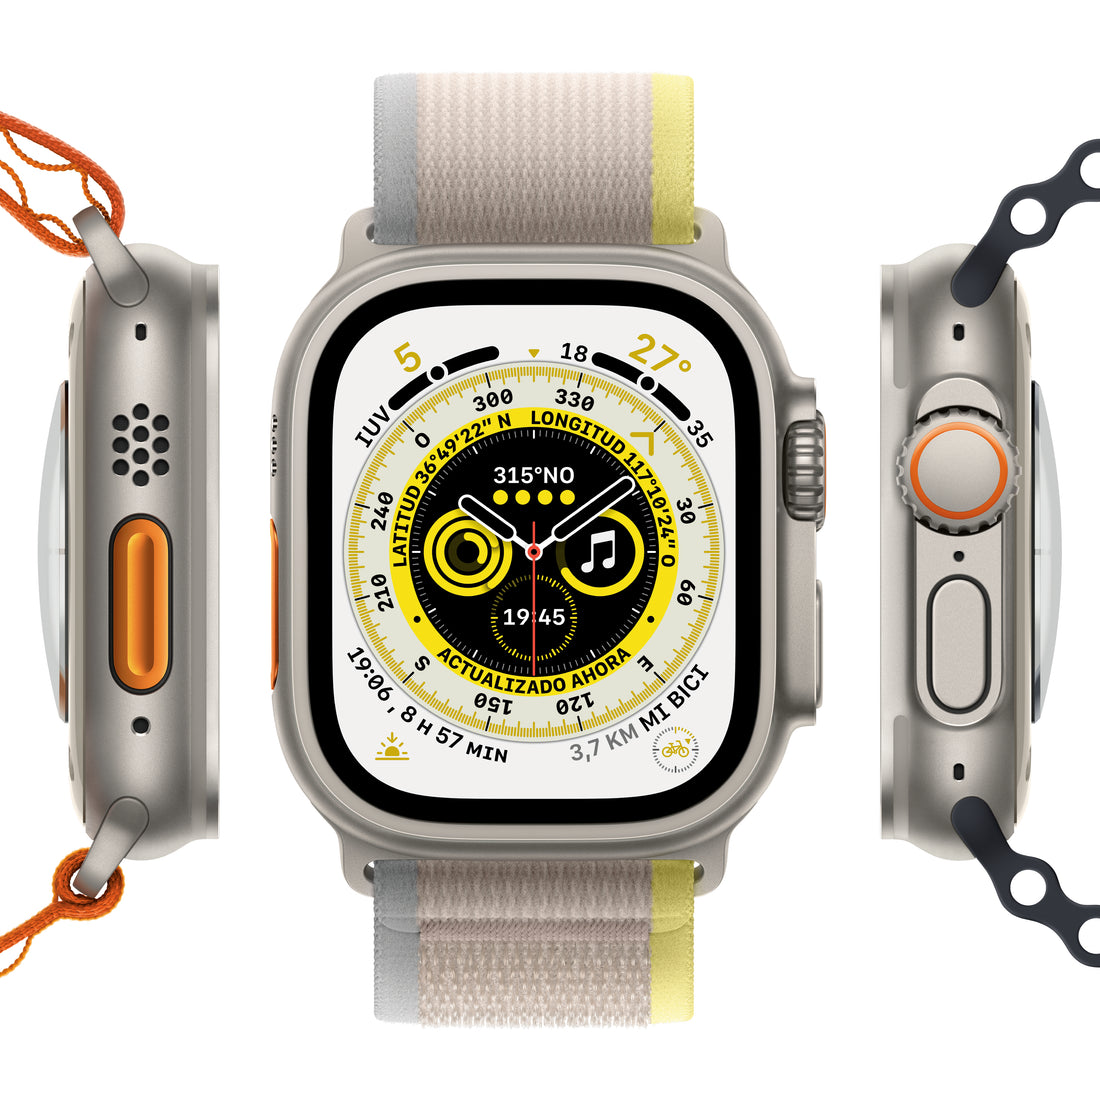 Apple Watch Ultra: Features, Design, and Specifications